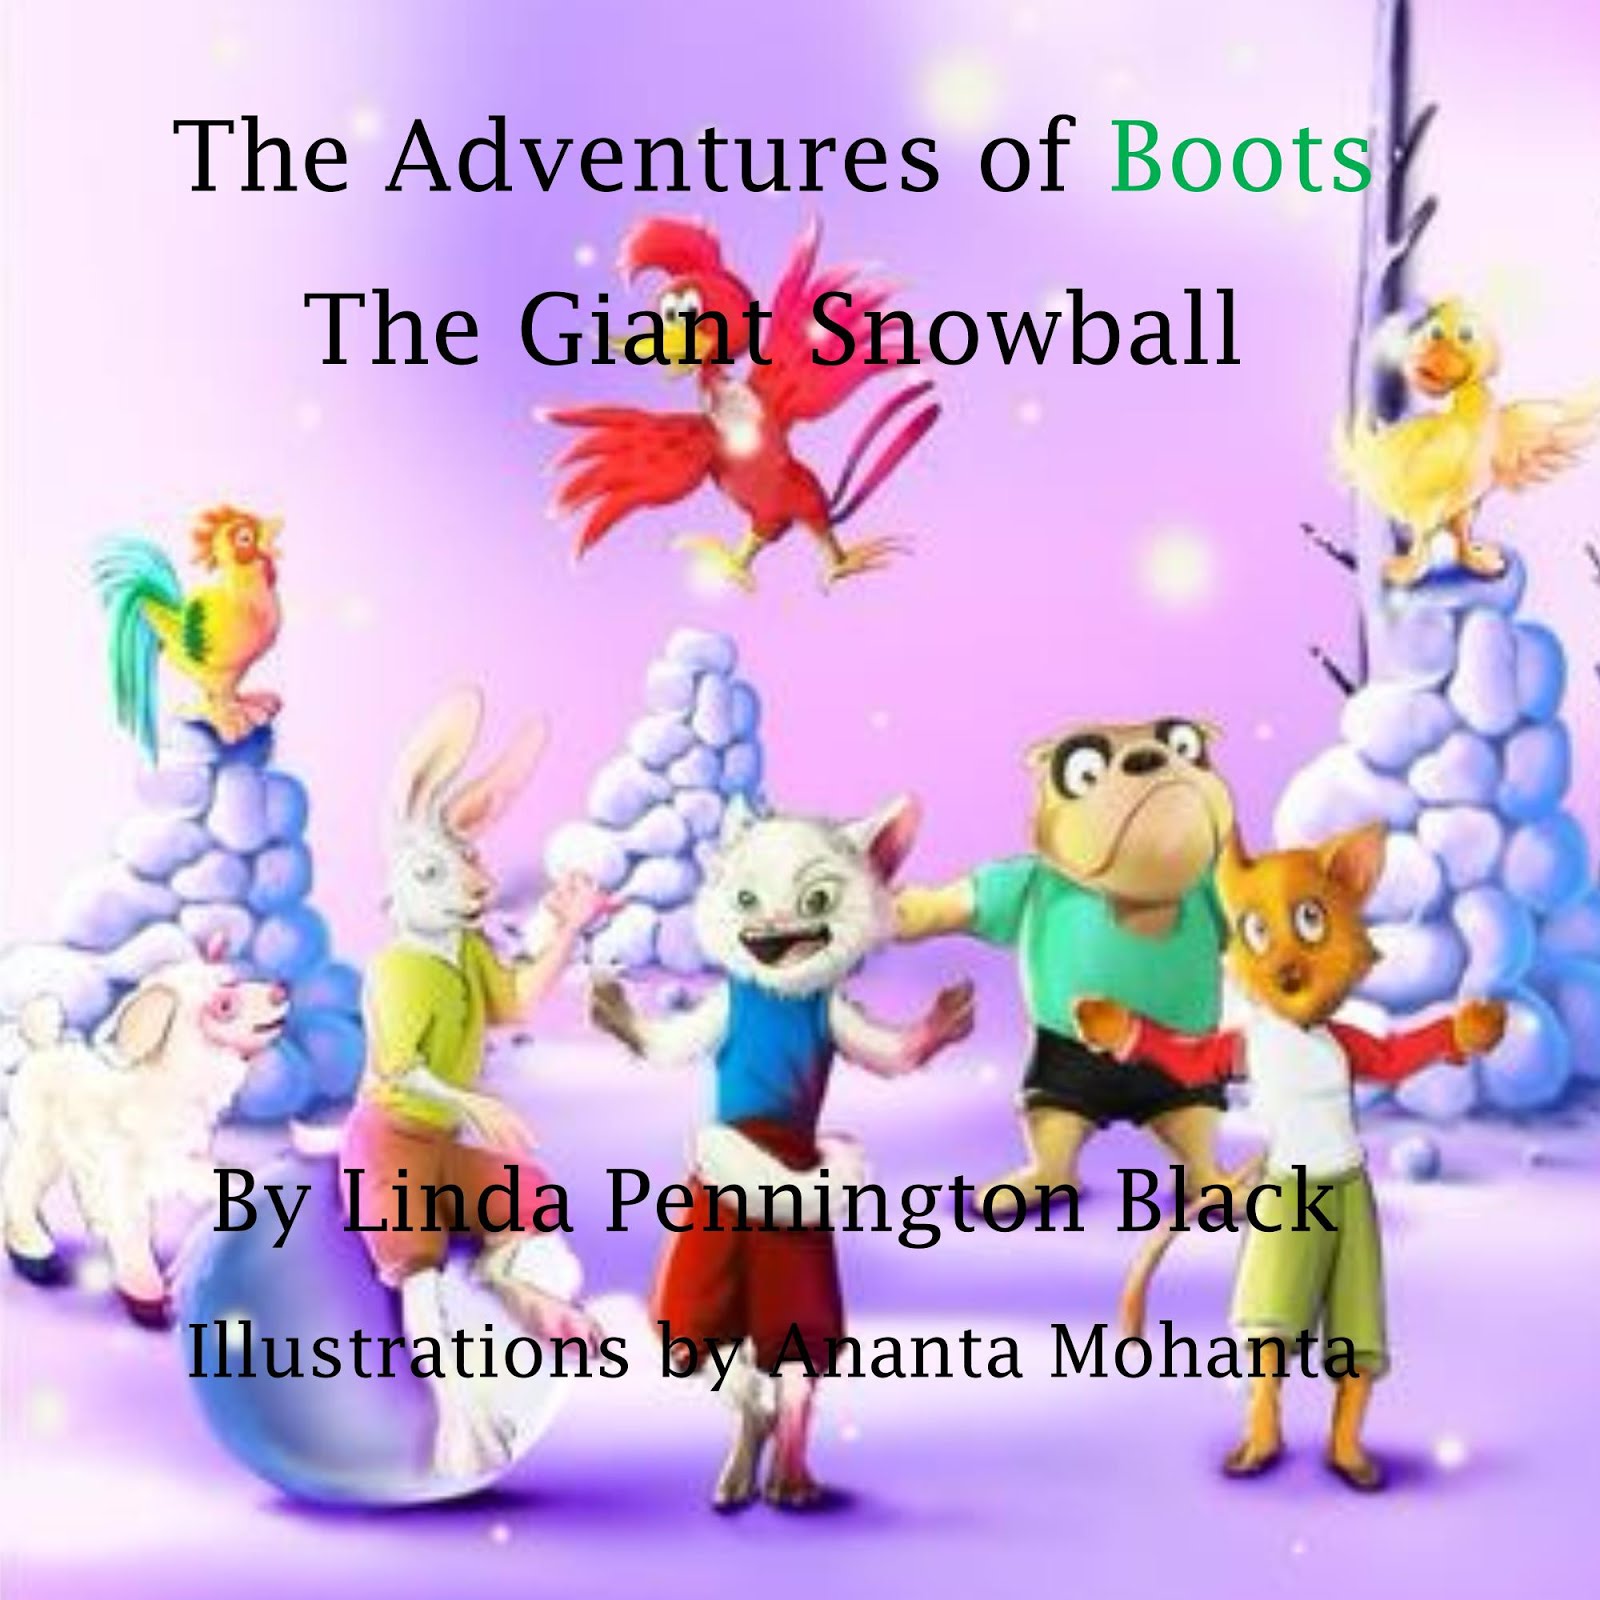 The Adventures of Boots: The Giant Snowball